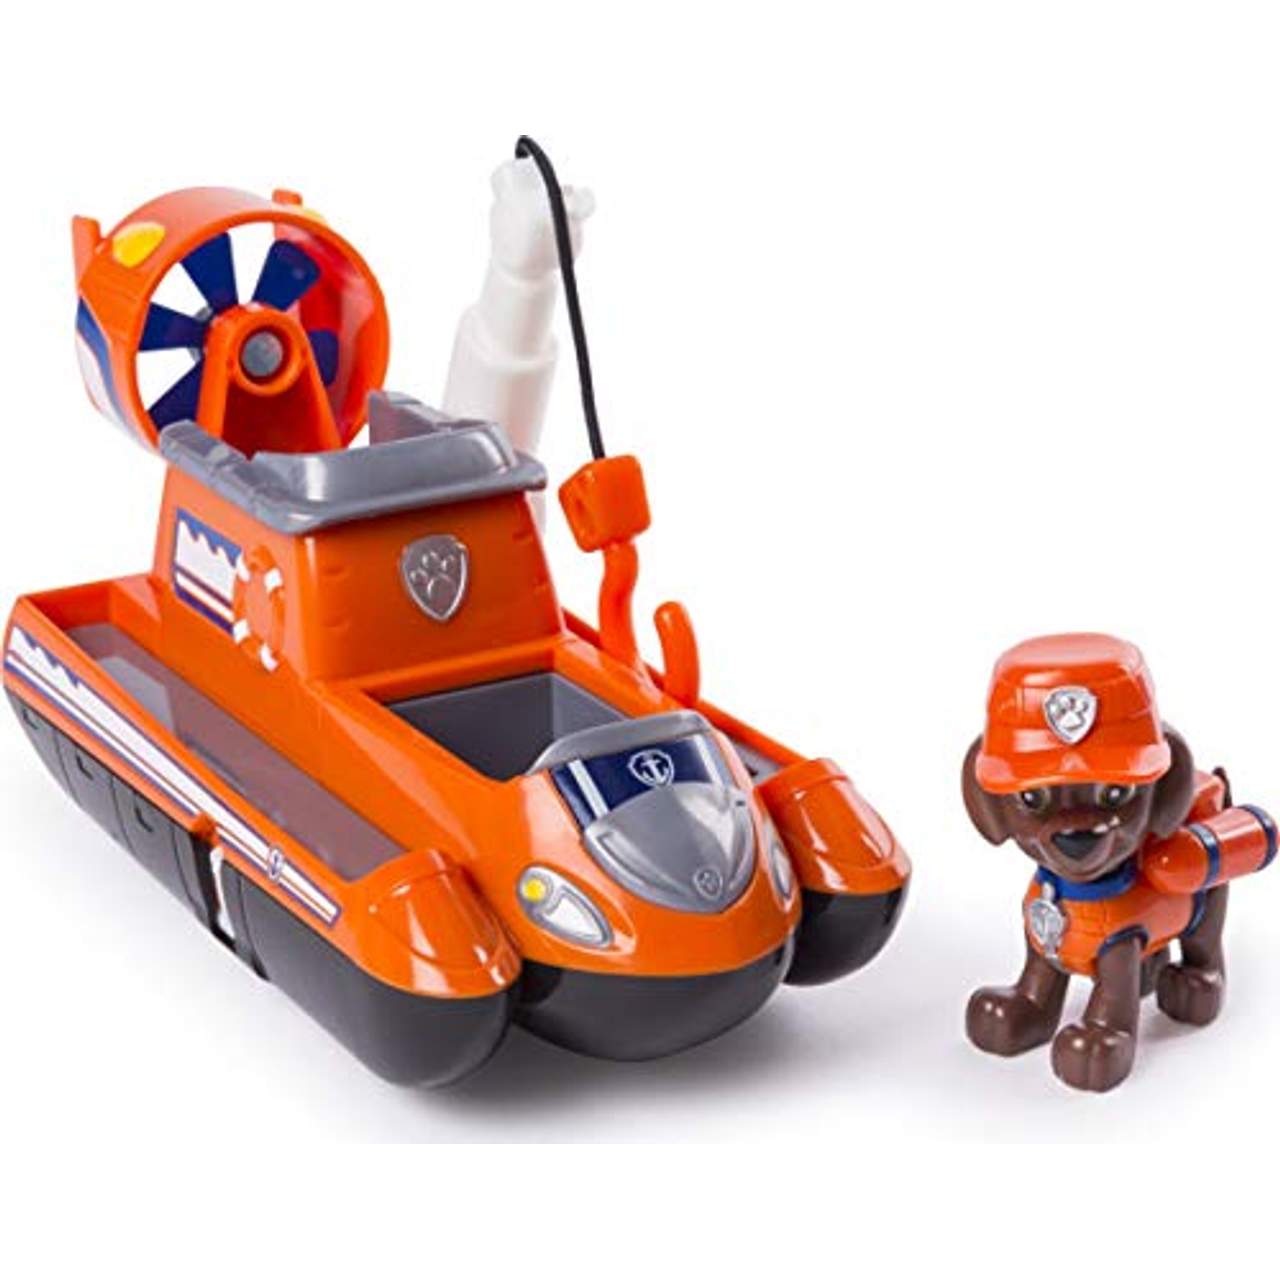 PAW Patrol 6044192 Ultimate Rescue Themed Vehicles